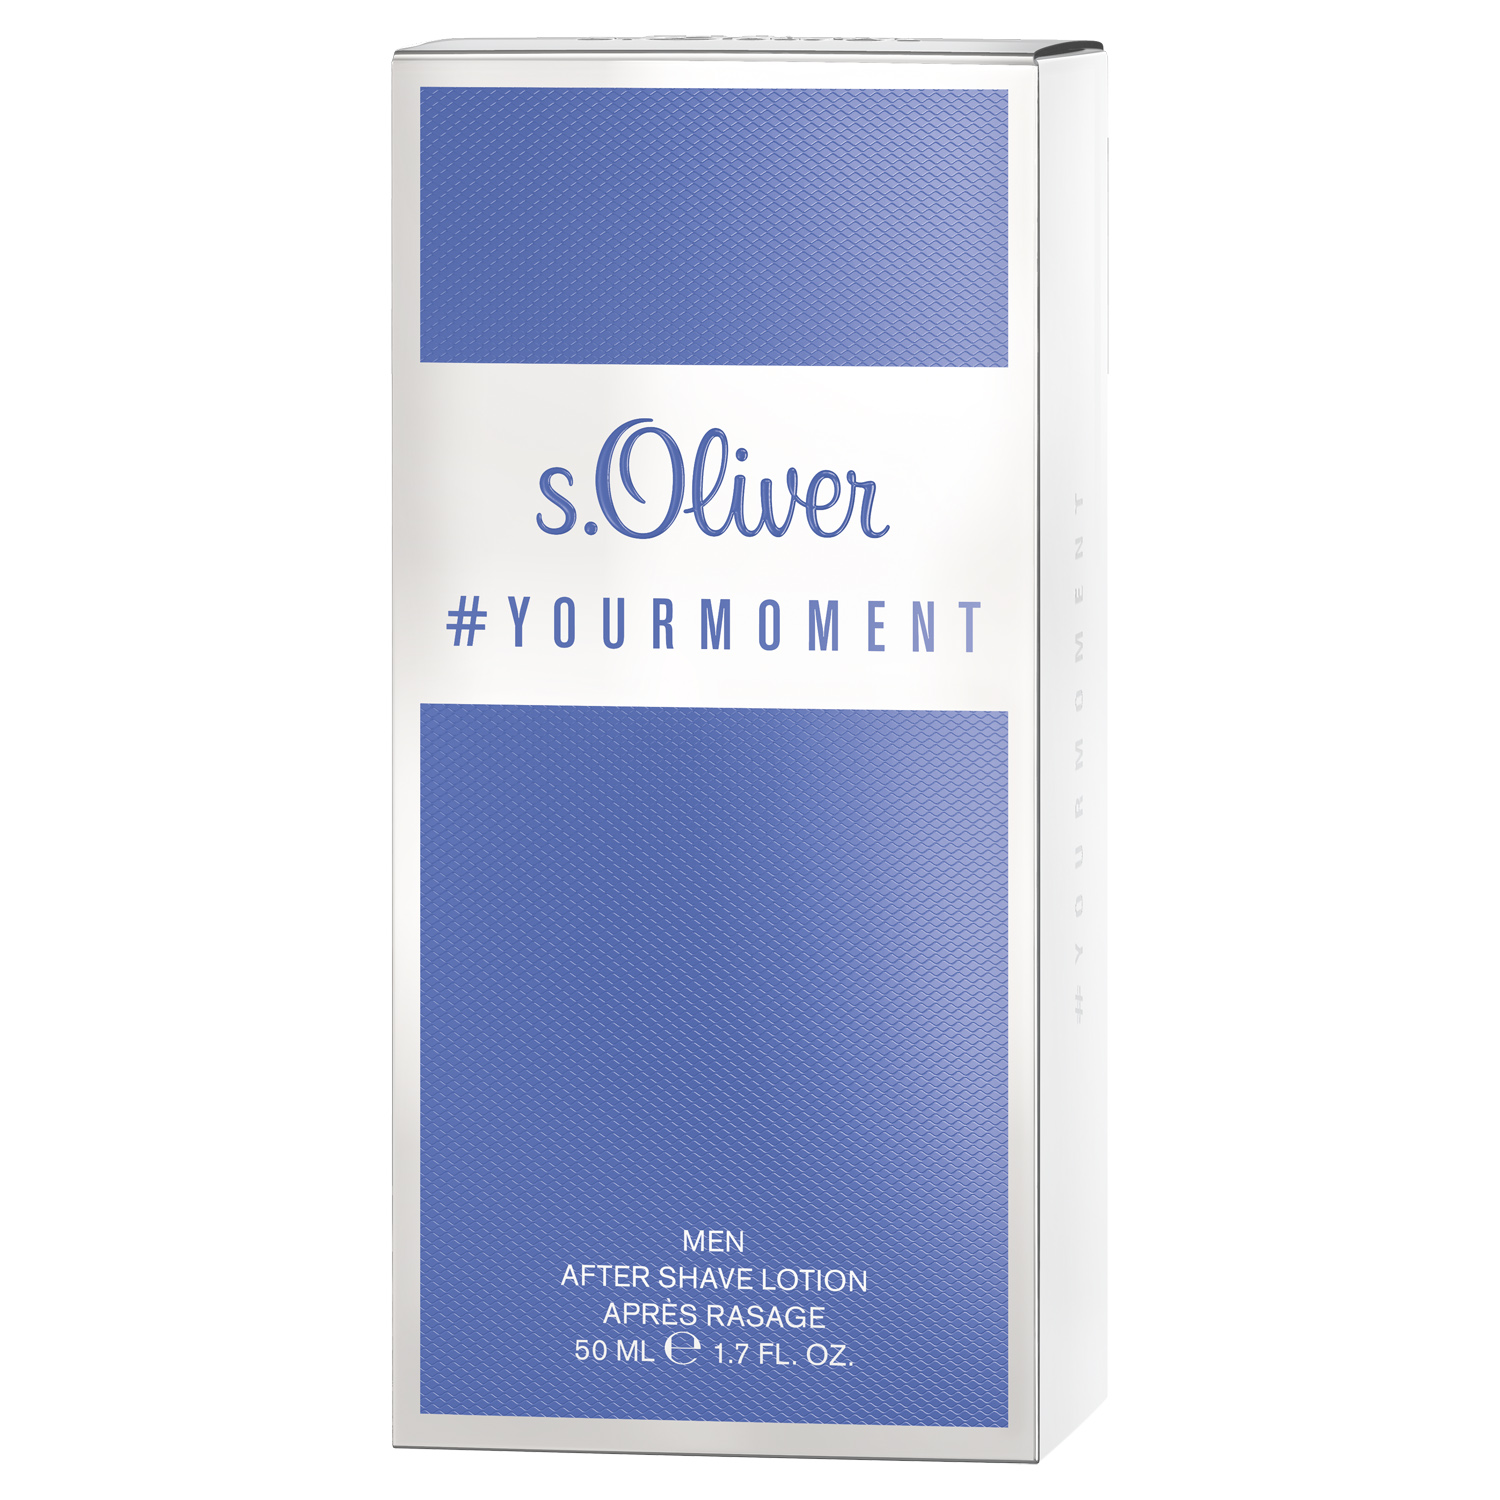 S.Oliver #YourMoment Men After Shave Lotion 50ml